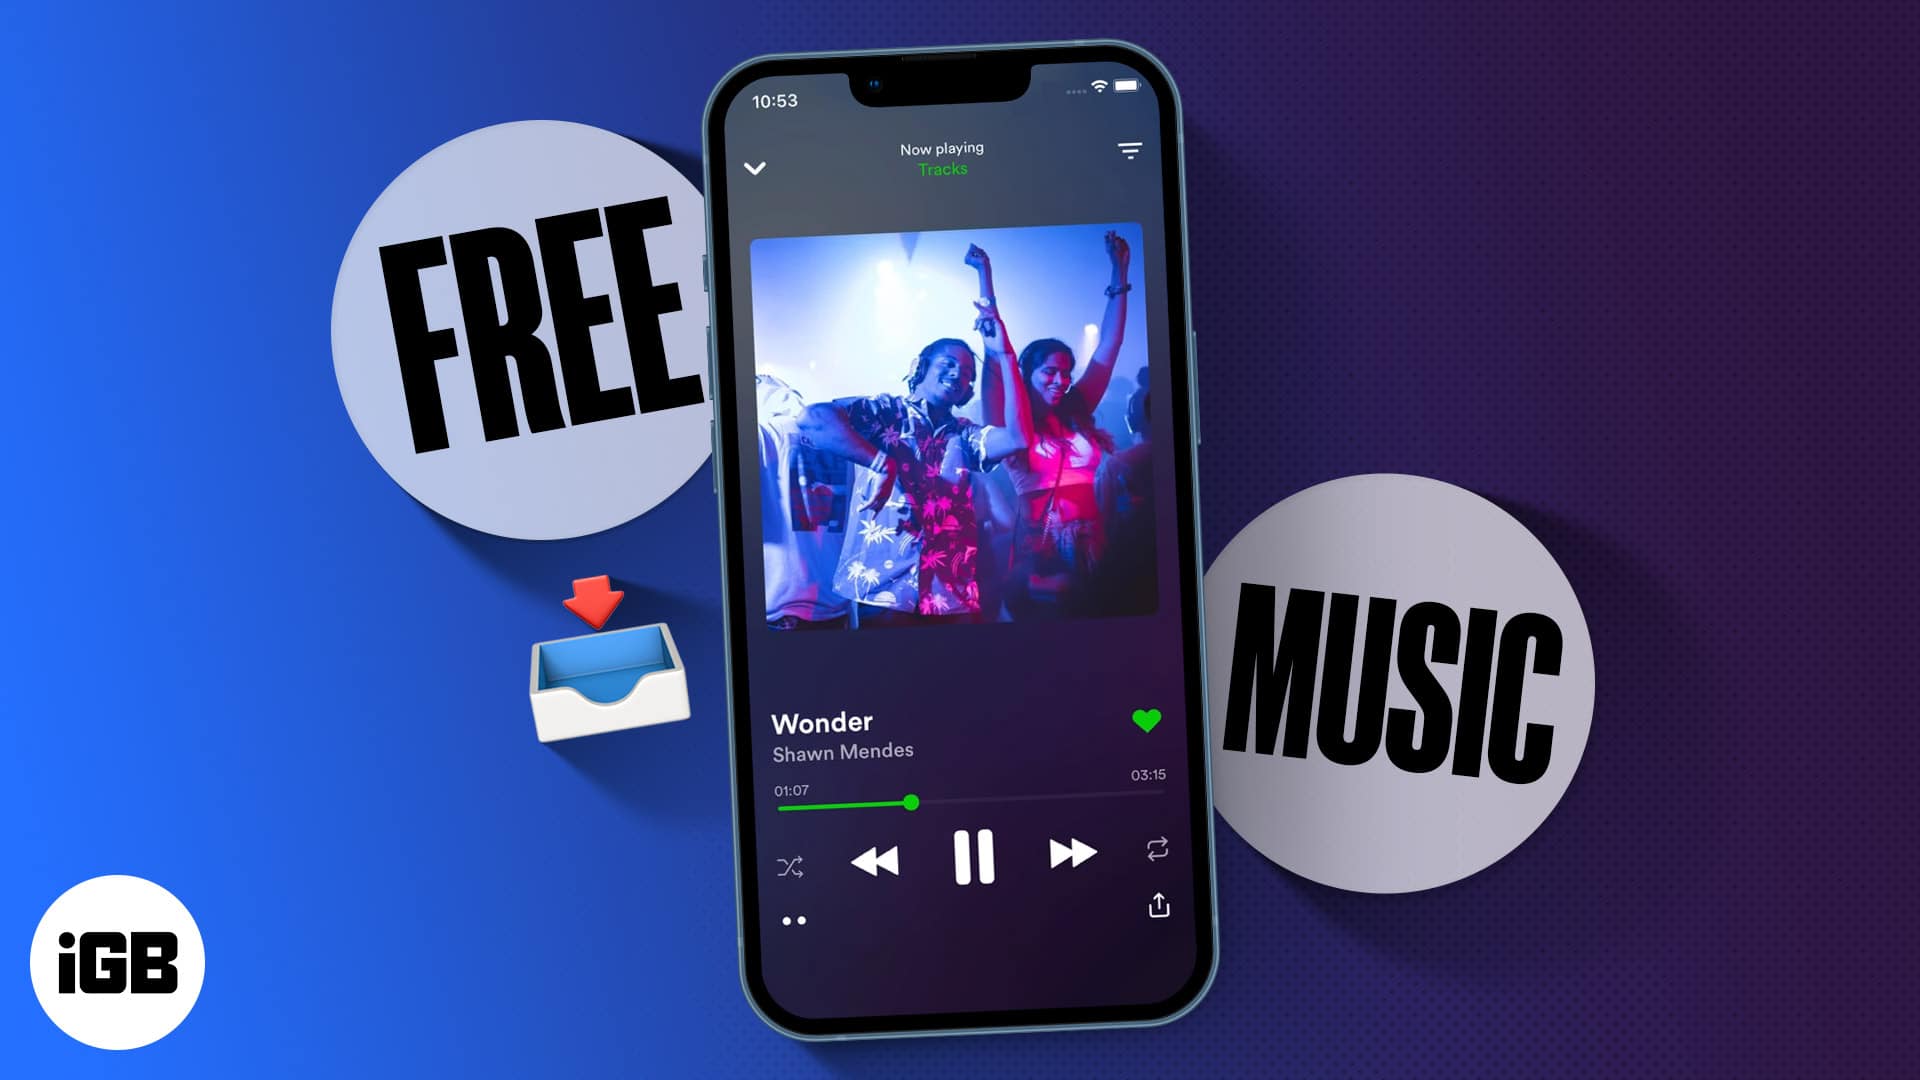 How to download free music on iphone